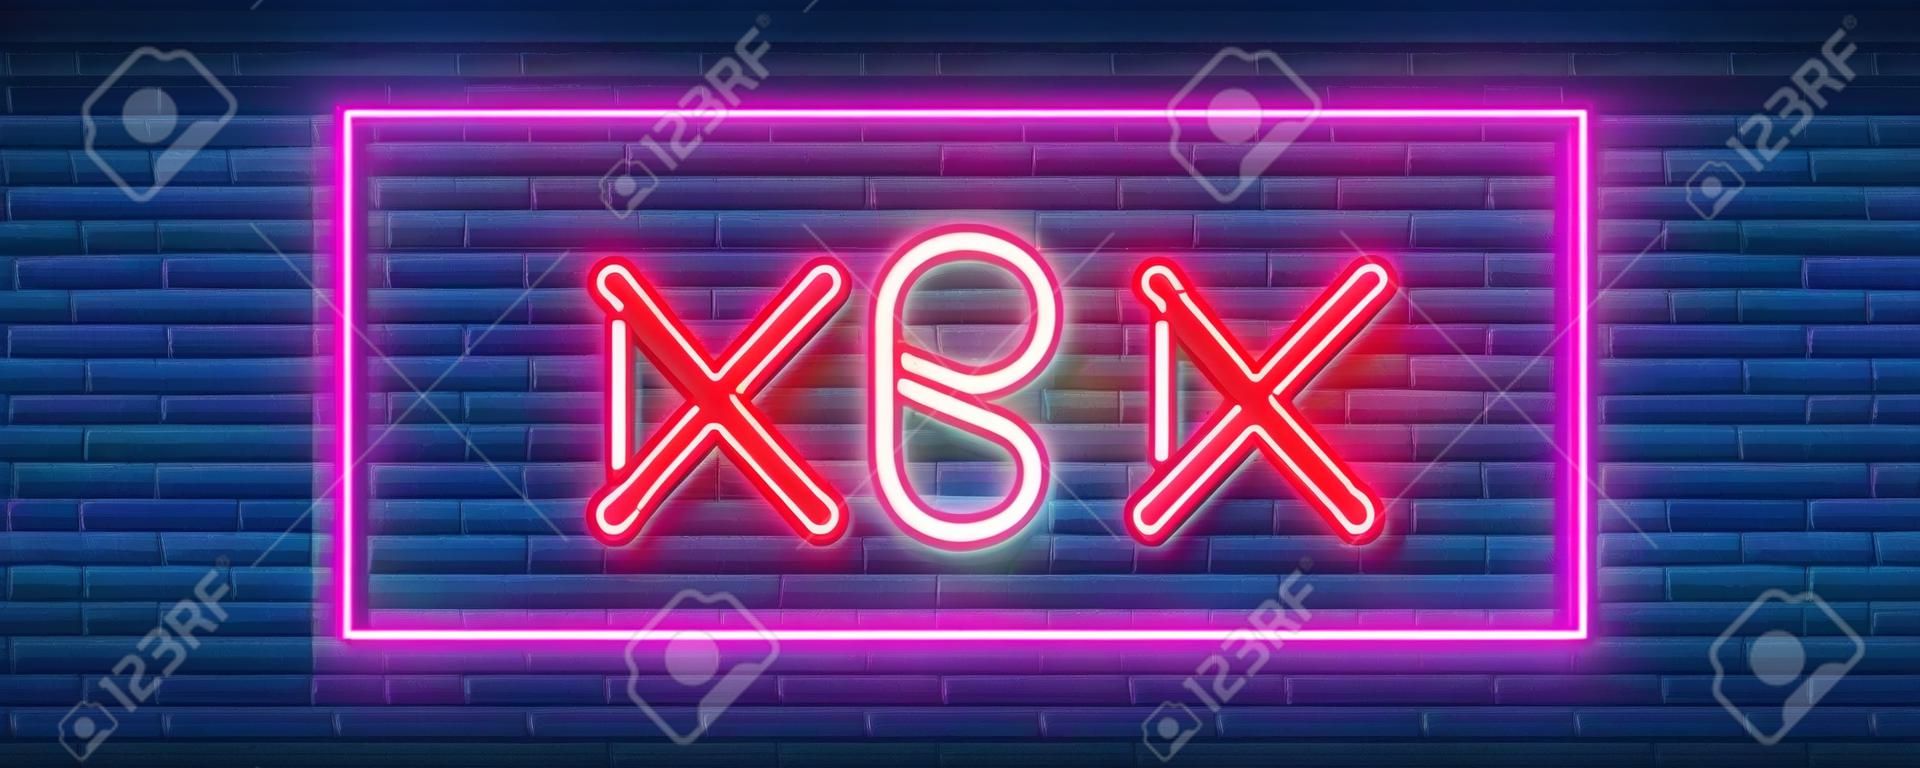 Adult shop logo, night sign in neon style. Neon sign, a symbol for  adult shop promotion. Adult Store. Bright banner, nightly advertising. Vector Illustration. Editing text neon sign. Neon alphabet